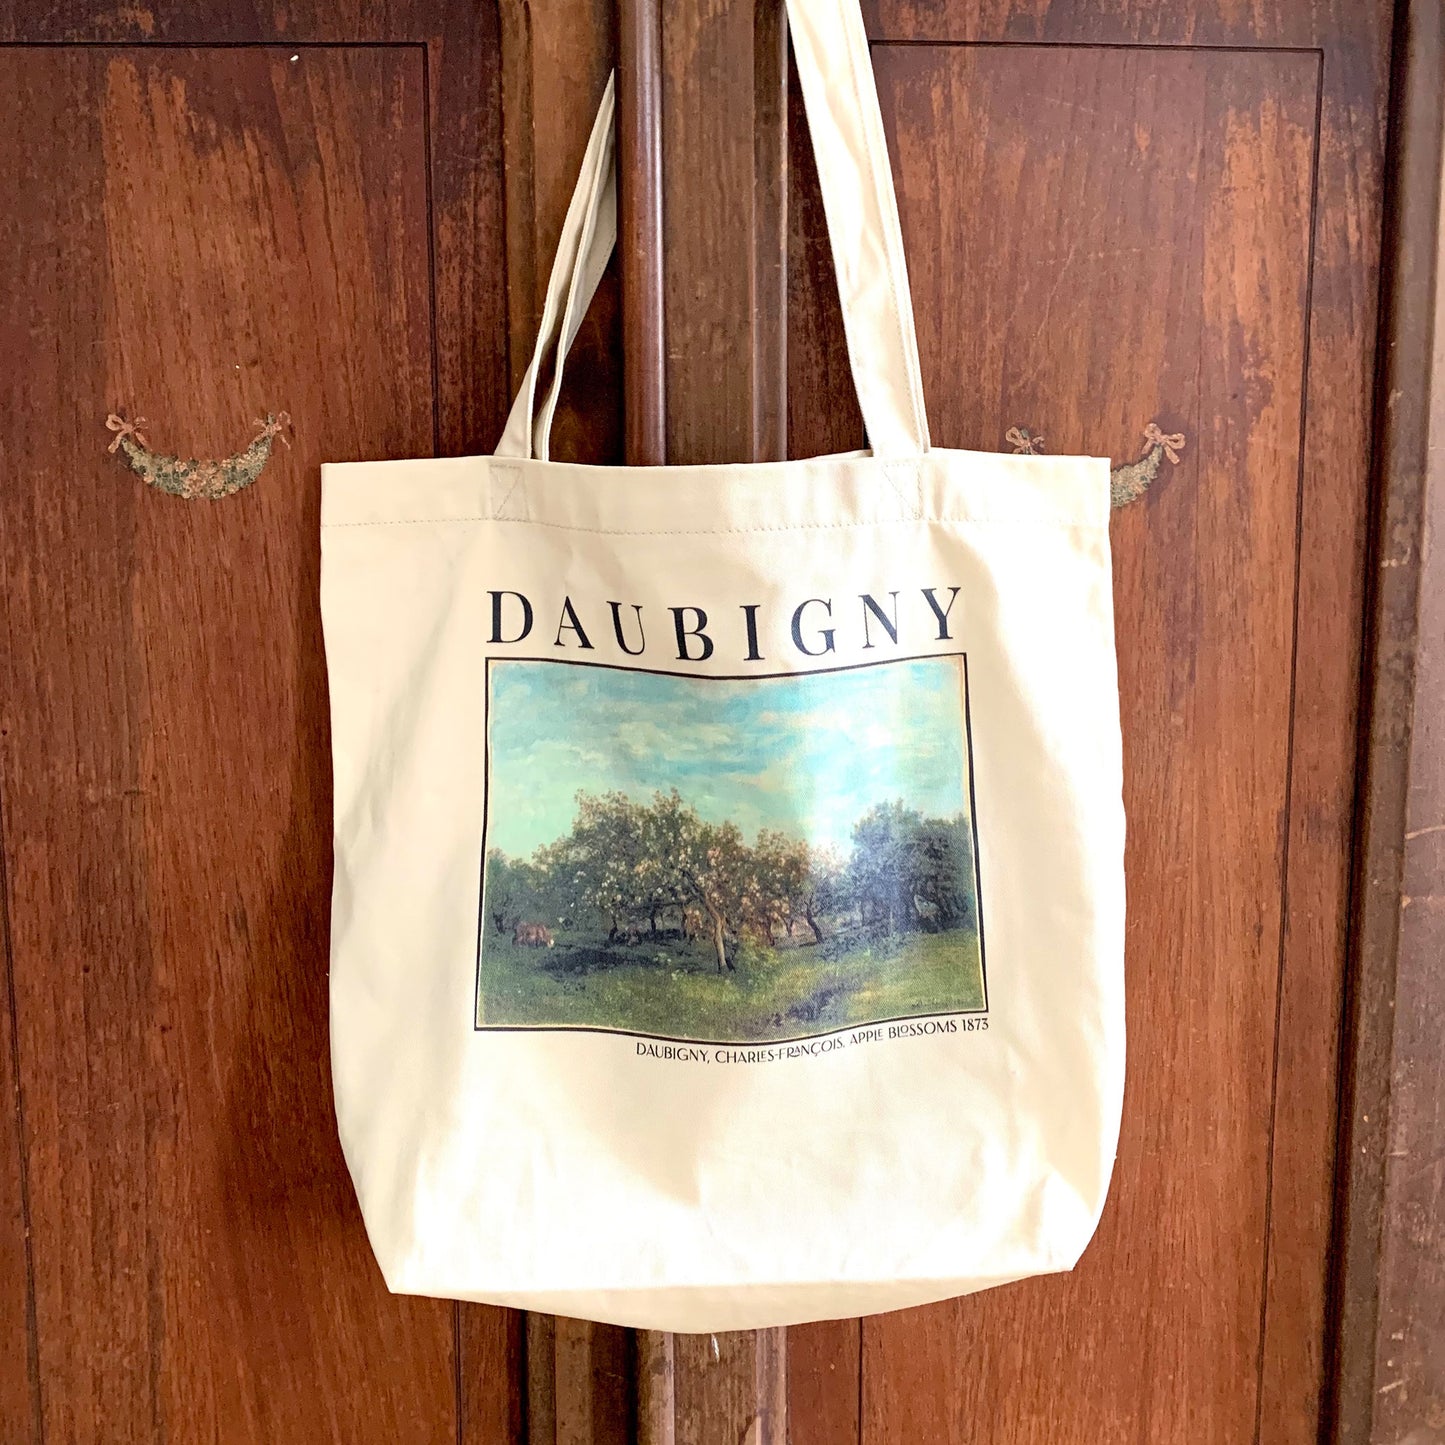 Charles-Francois Daubigny Eco Tote Bag. This market bag is hanging on a door displaying the print